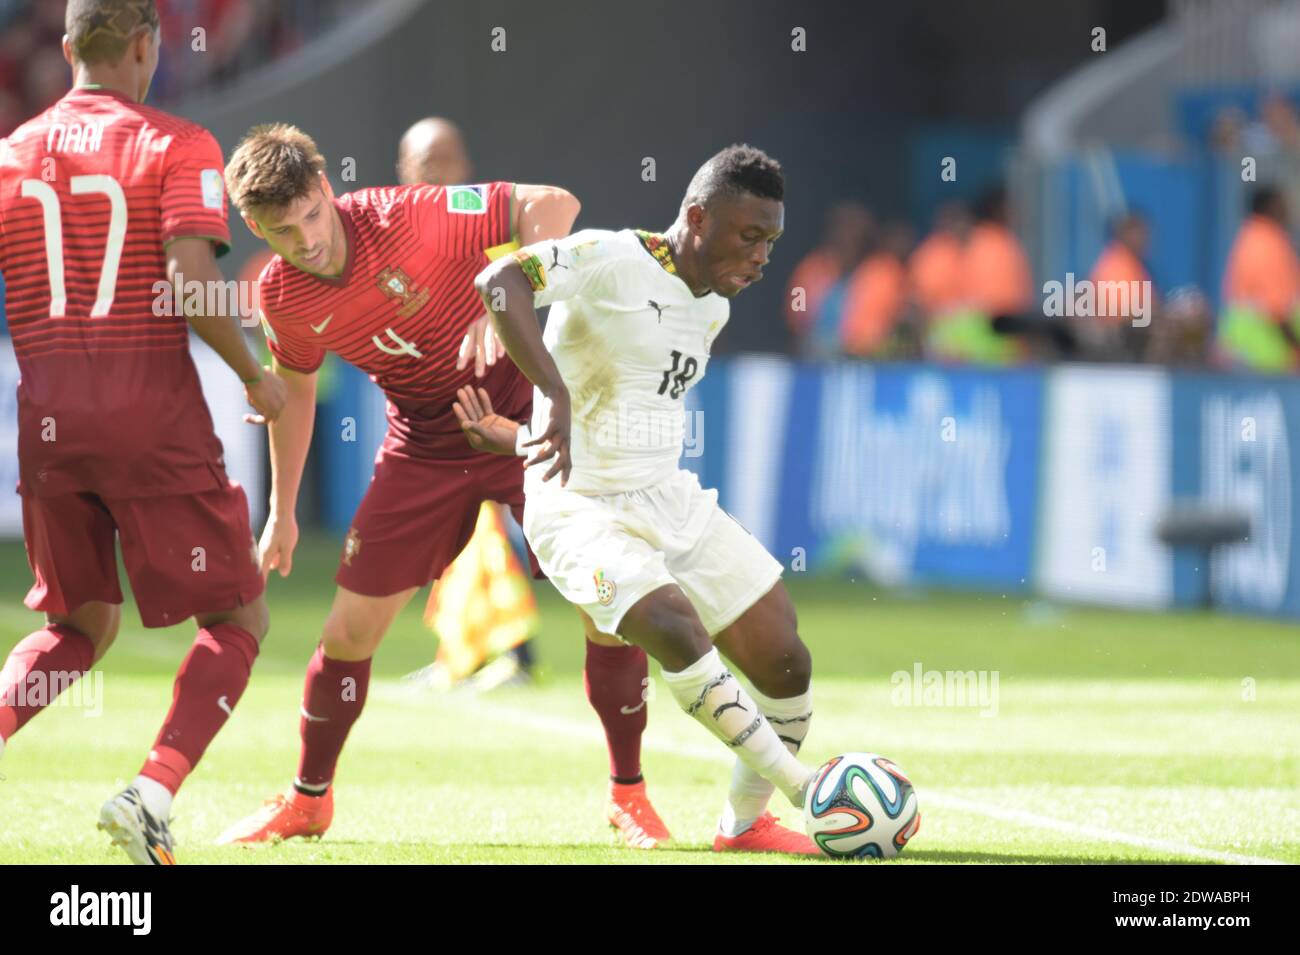 Ghana's Abdul Majeed Waris battling Portugal's Miguel Veloso during Soccer World Cup 2014 First round Group G match Ghana v Portugal at National Stadium, Brasilia, Brazil on June 26, 2014. Portugal won 2-1. Photo by Henri Szwarc/ABACAPRESS.COM Stock Photo